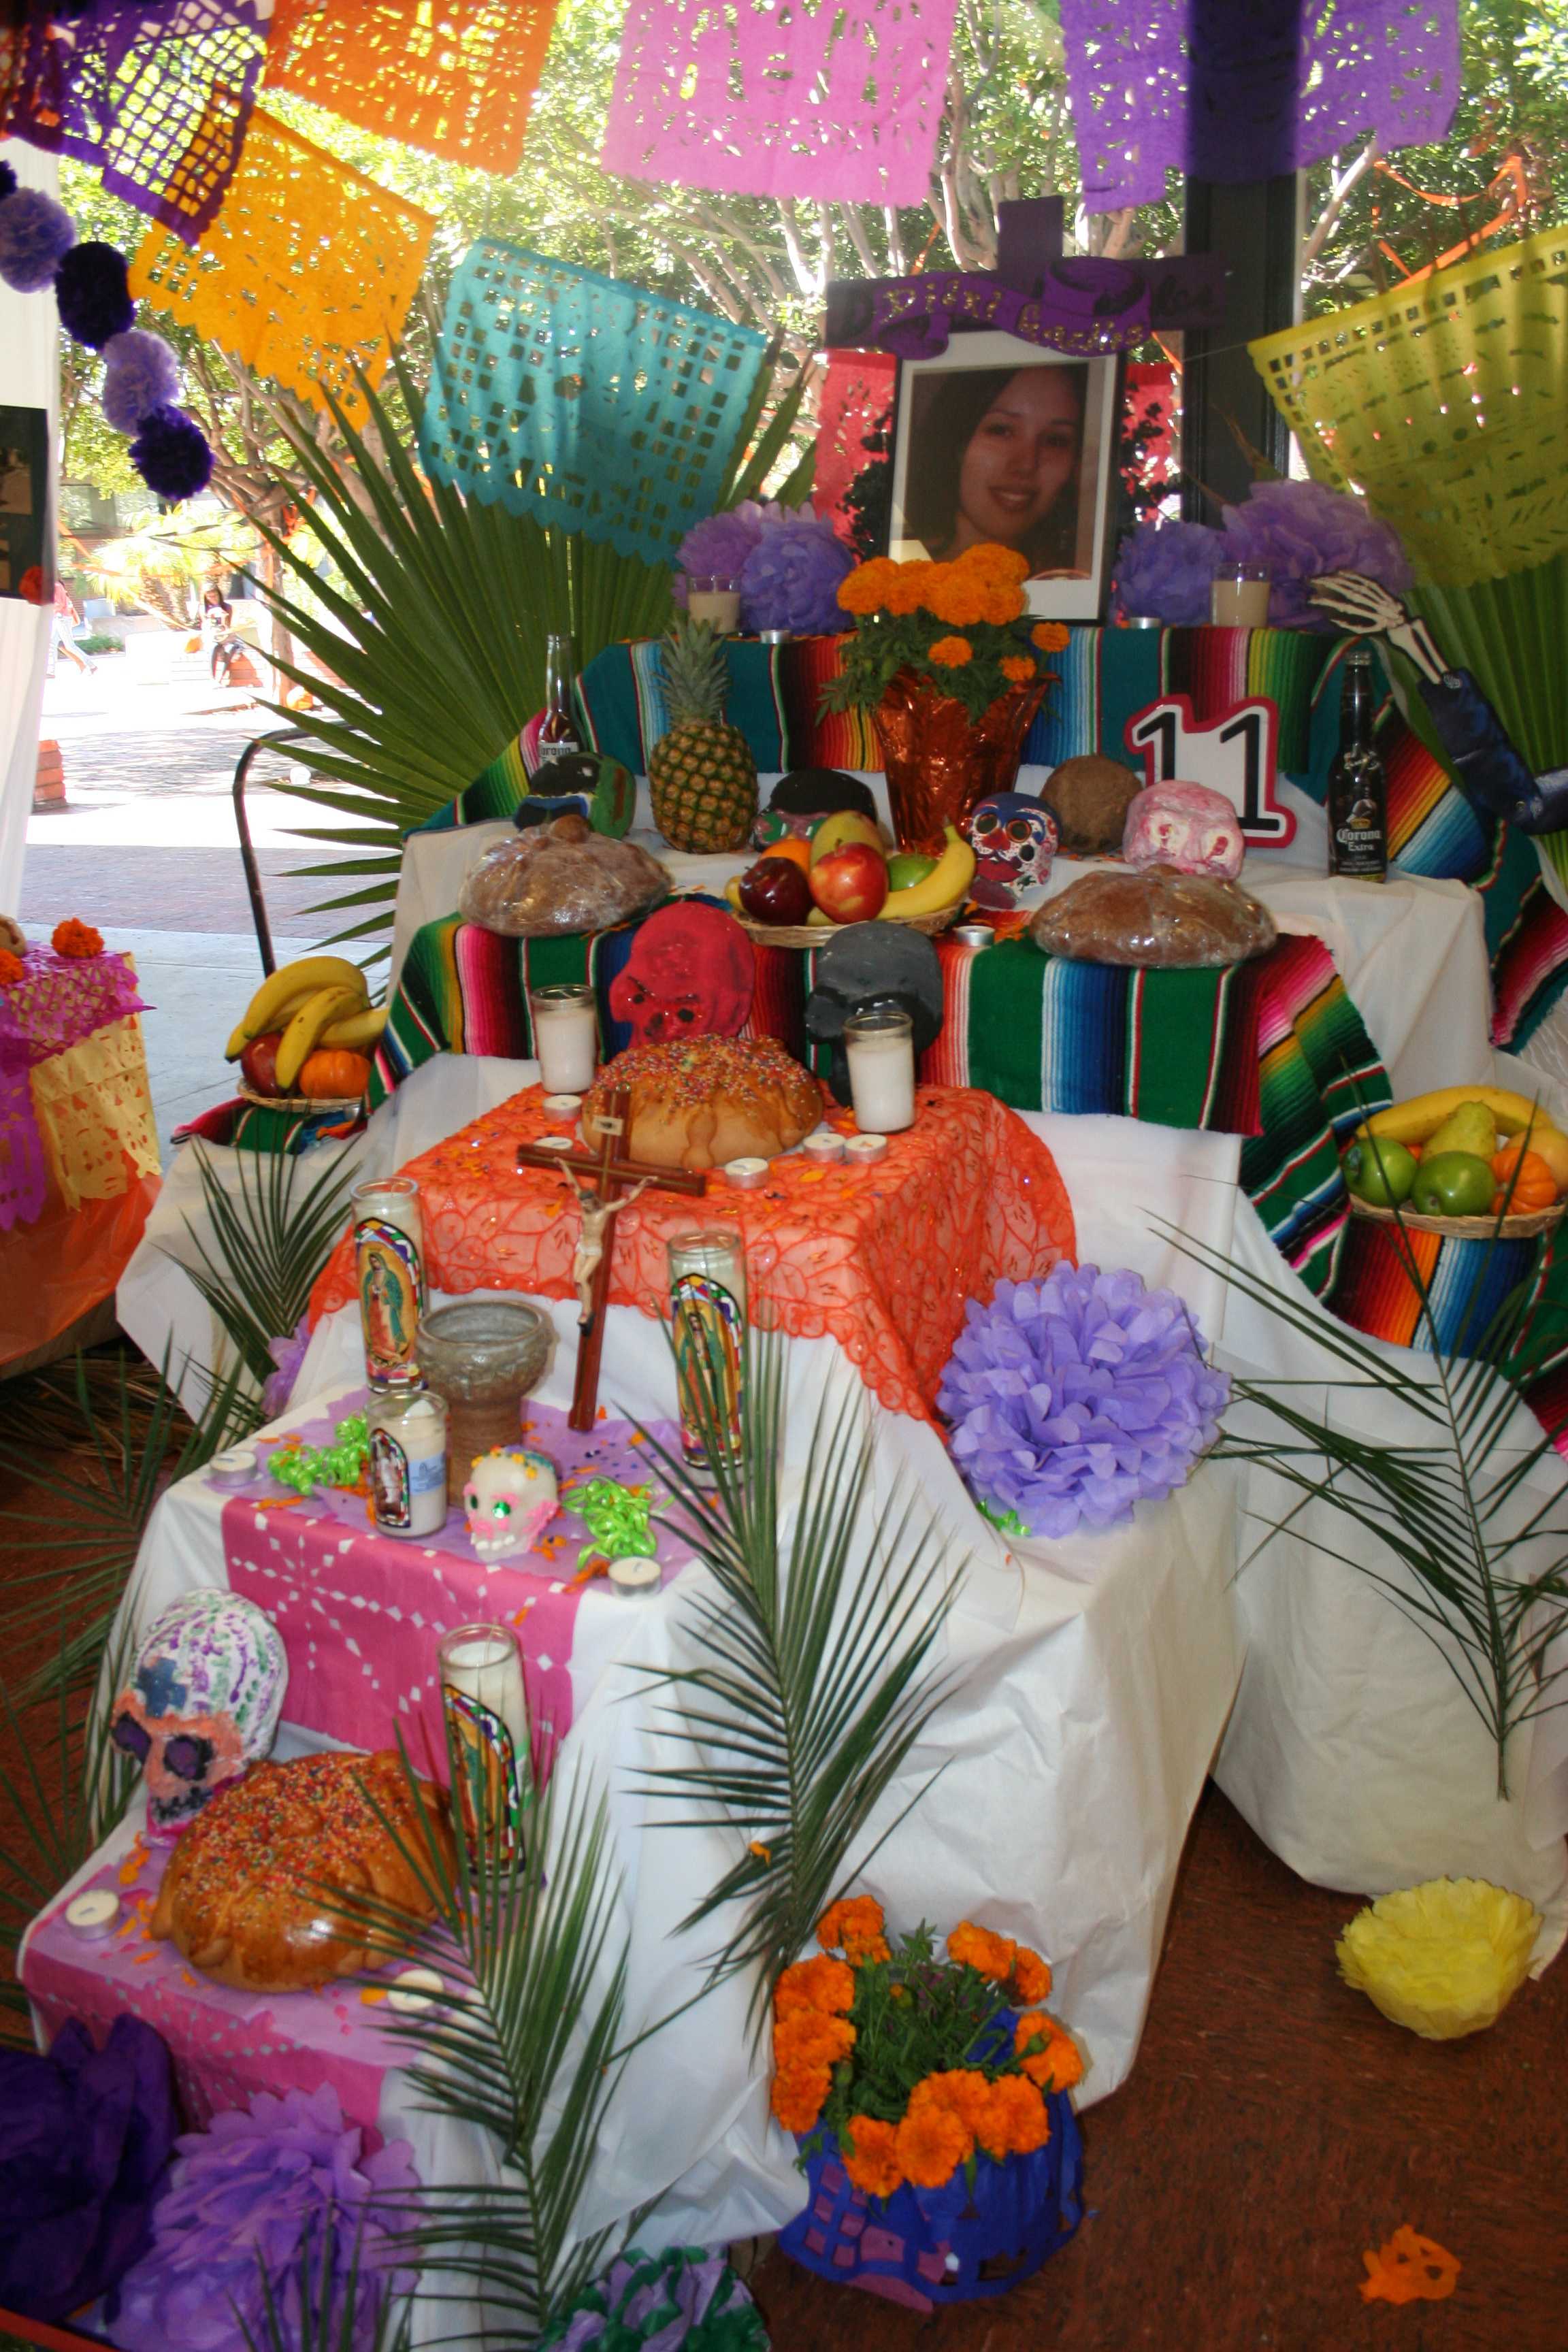 One of many different altars that were on display in the cafeteria to commemorate Dia de Los Muertos. Altars and offerings are created to honor loved ones who have perished. Michelle Moran, City Times.